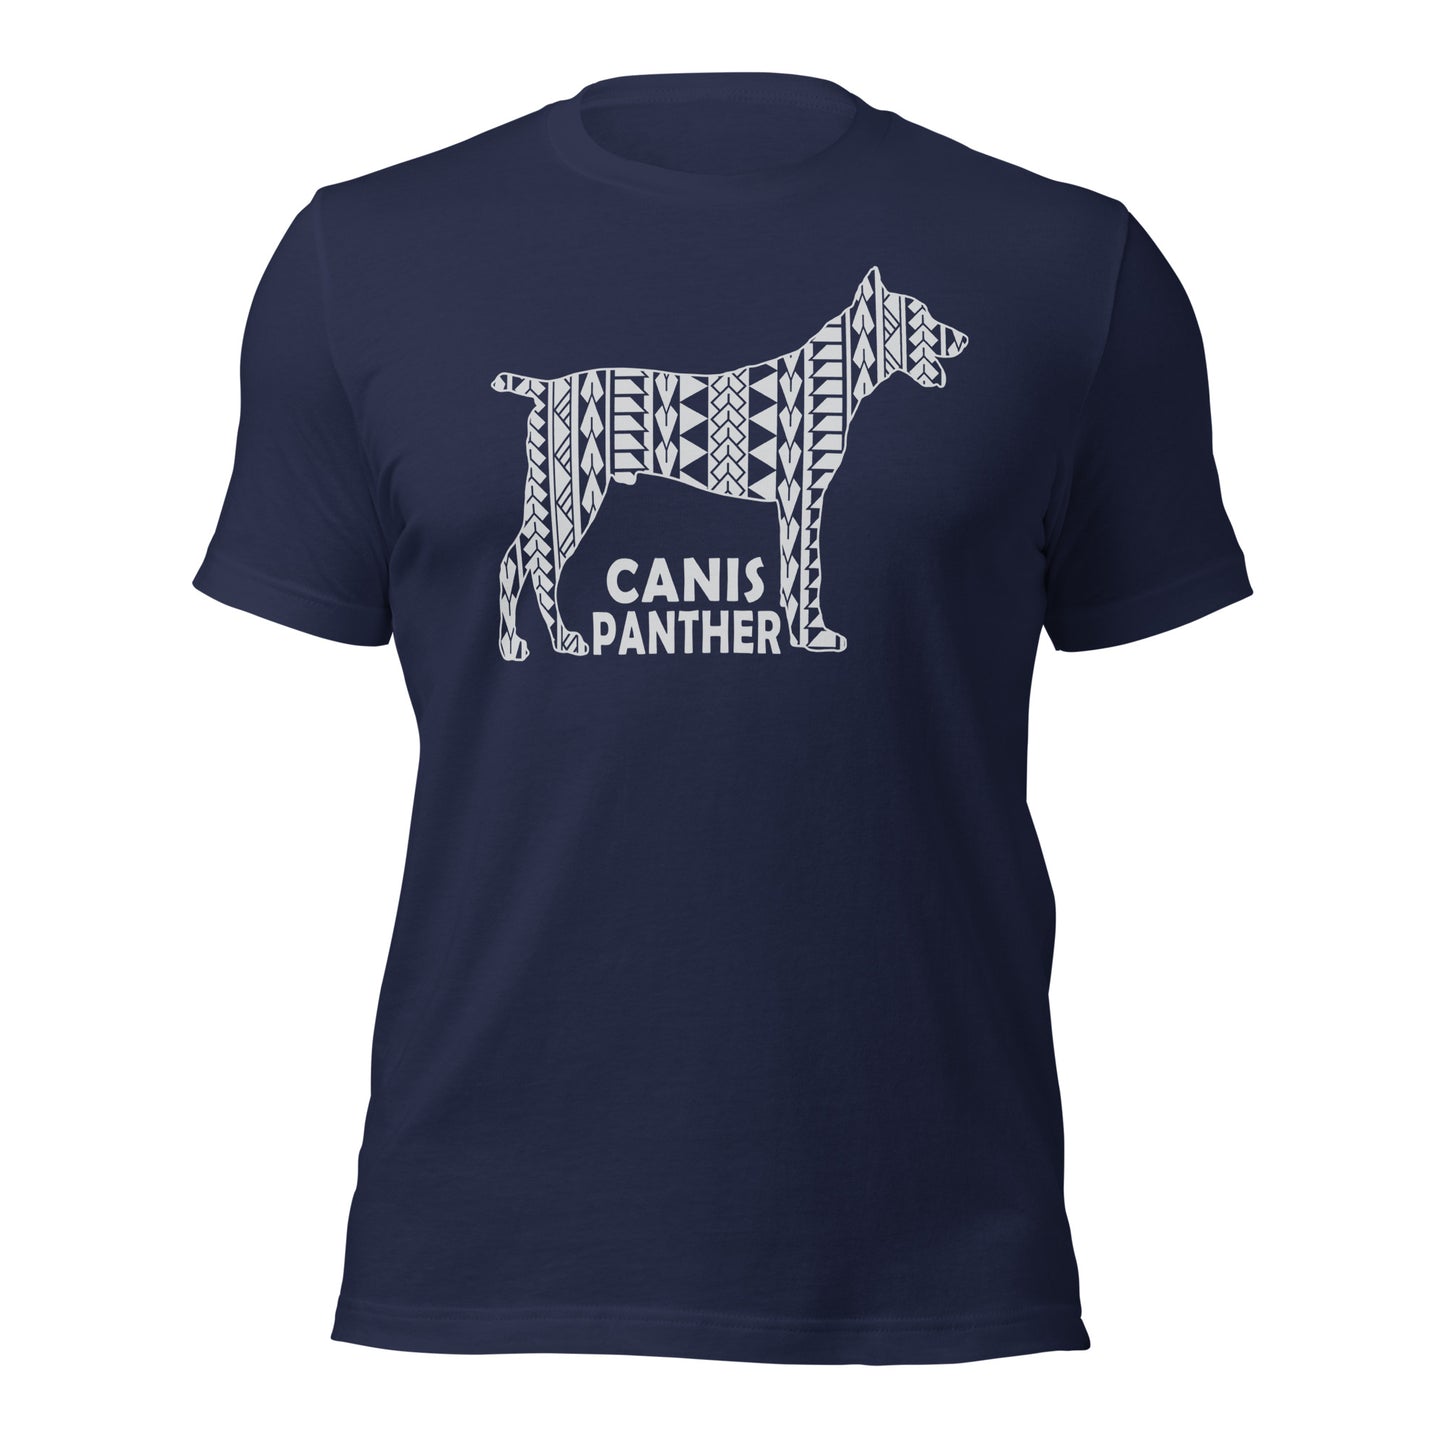 Canis Panther Polynesian t-shirt navy by Dog Artistry.